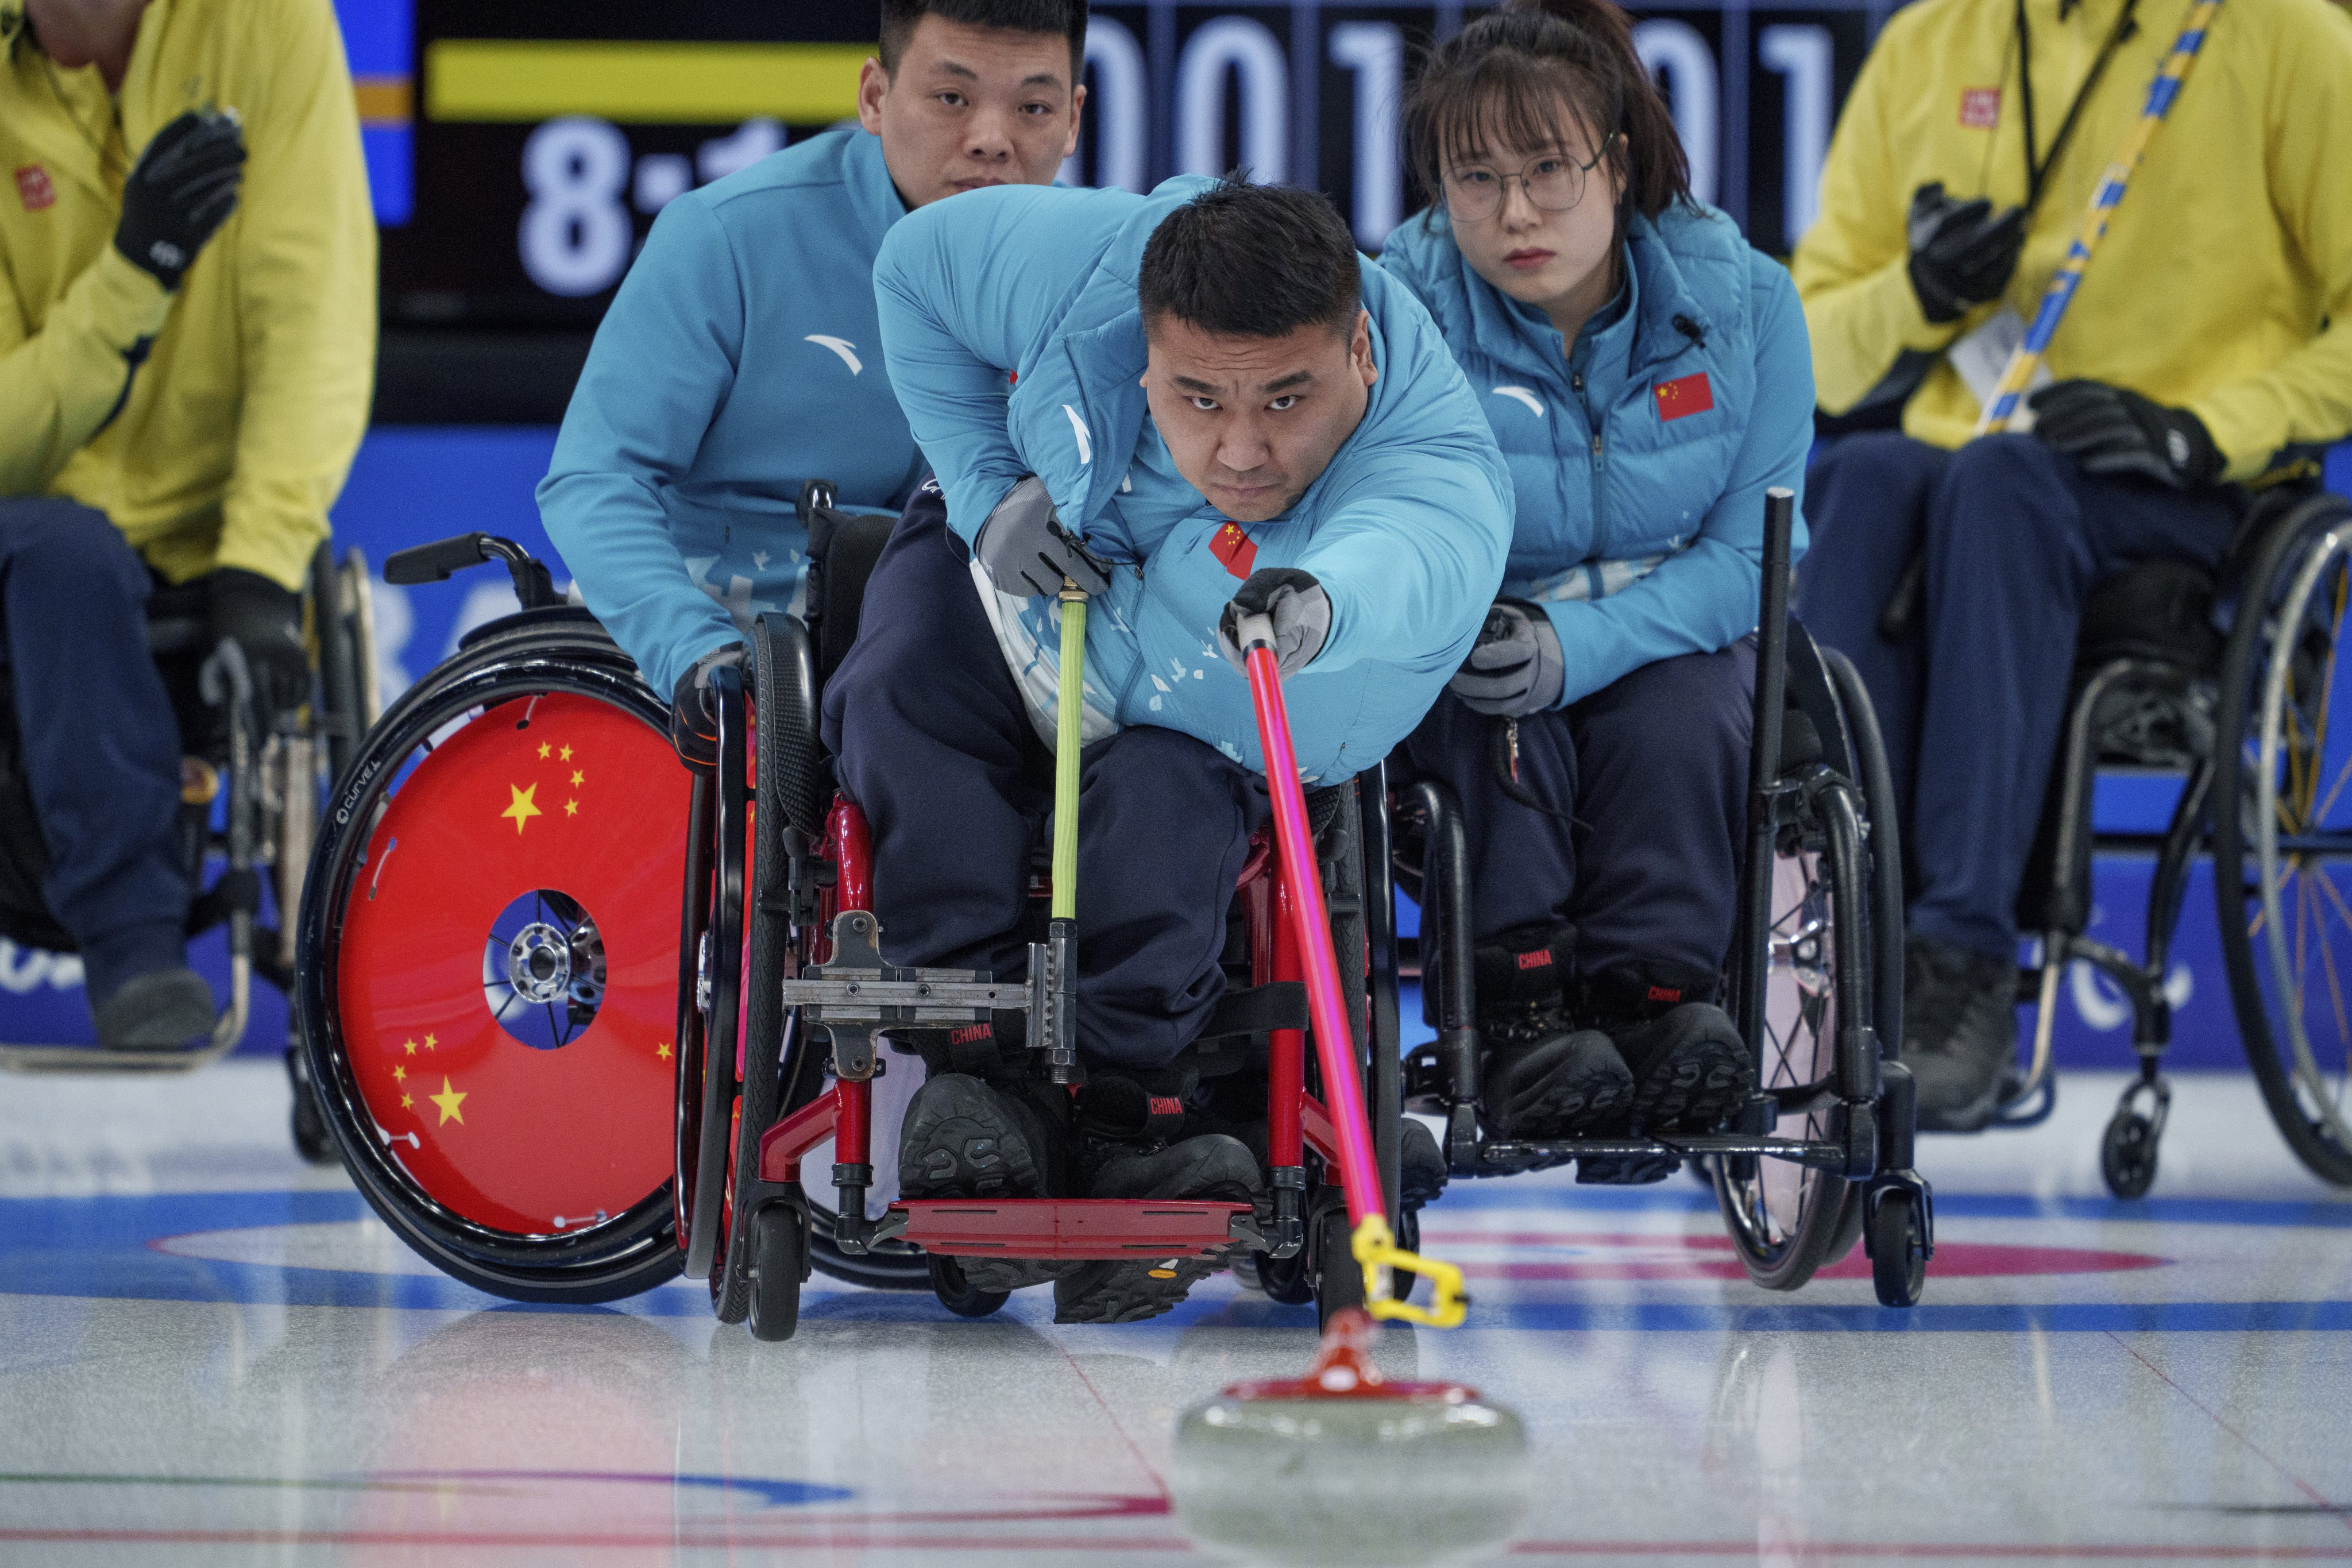 Wang Haitao of China plays a stone in the wheelchair curling gold medal game against Sweden. Photo: AP